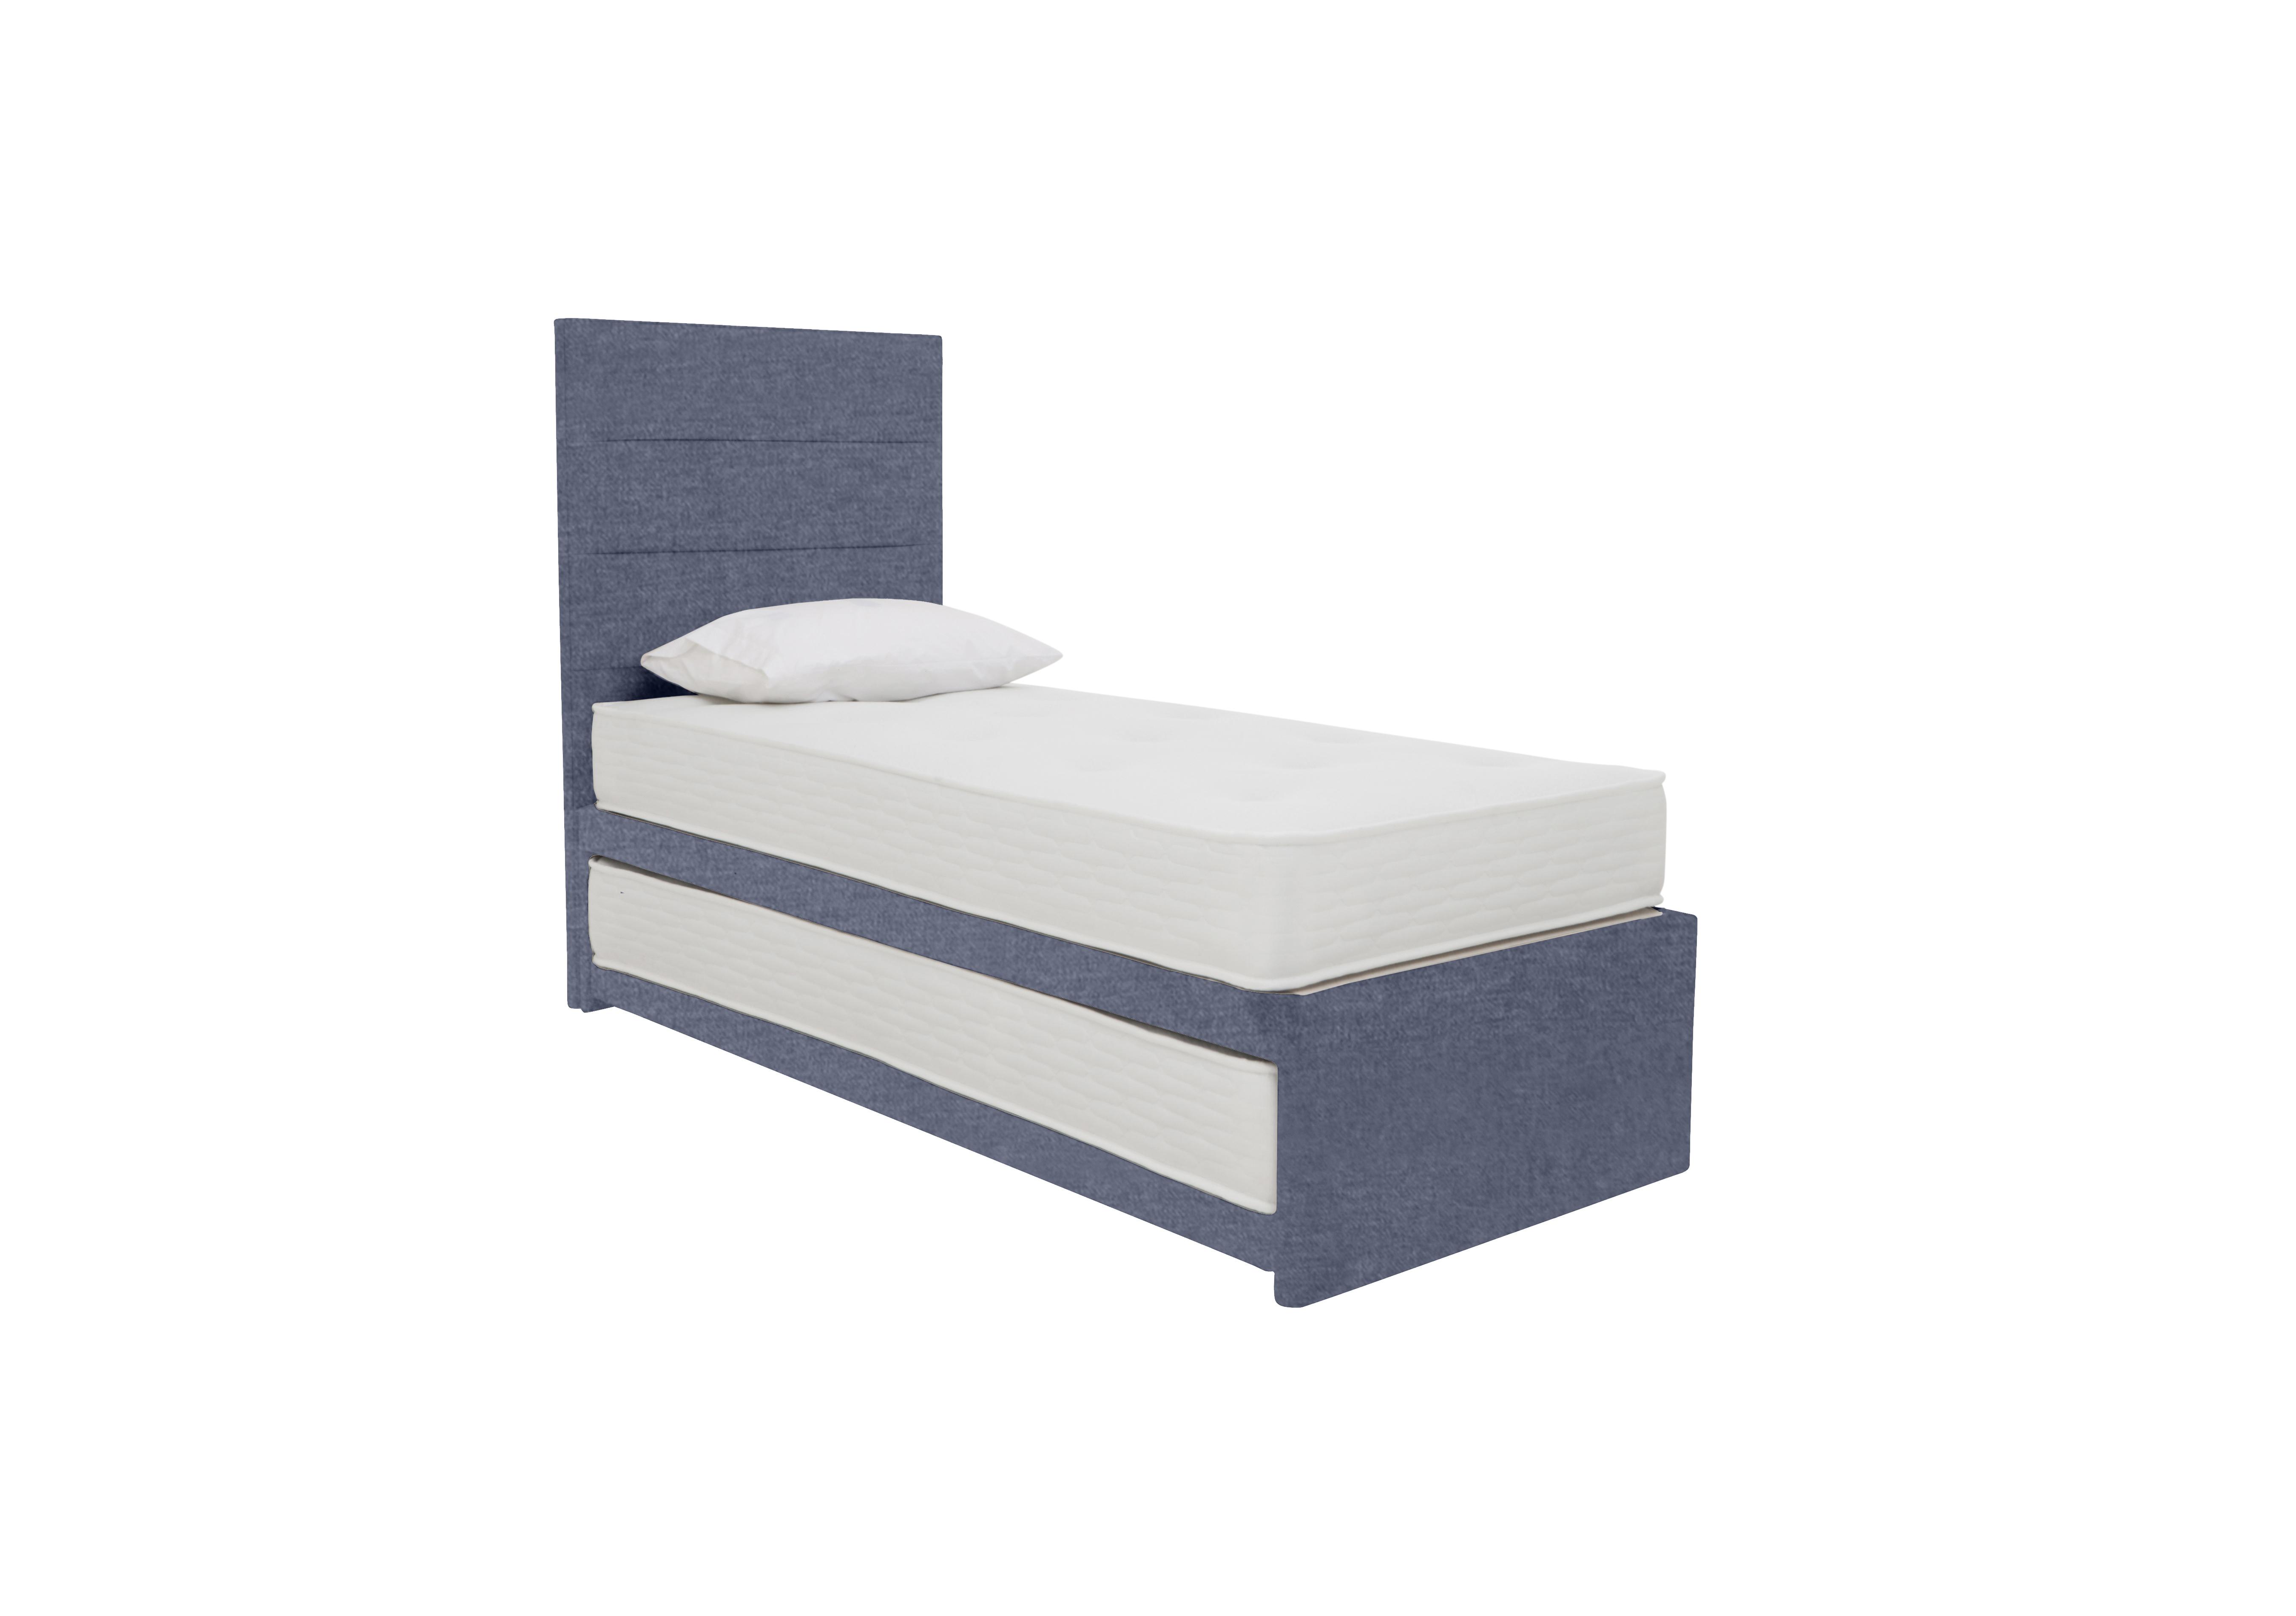 Guest Bed with Pocket Sprung Mattress in Grace Marine on Furniture Village